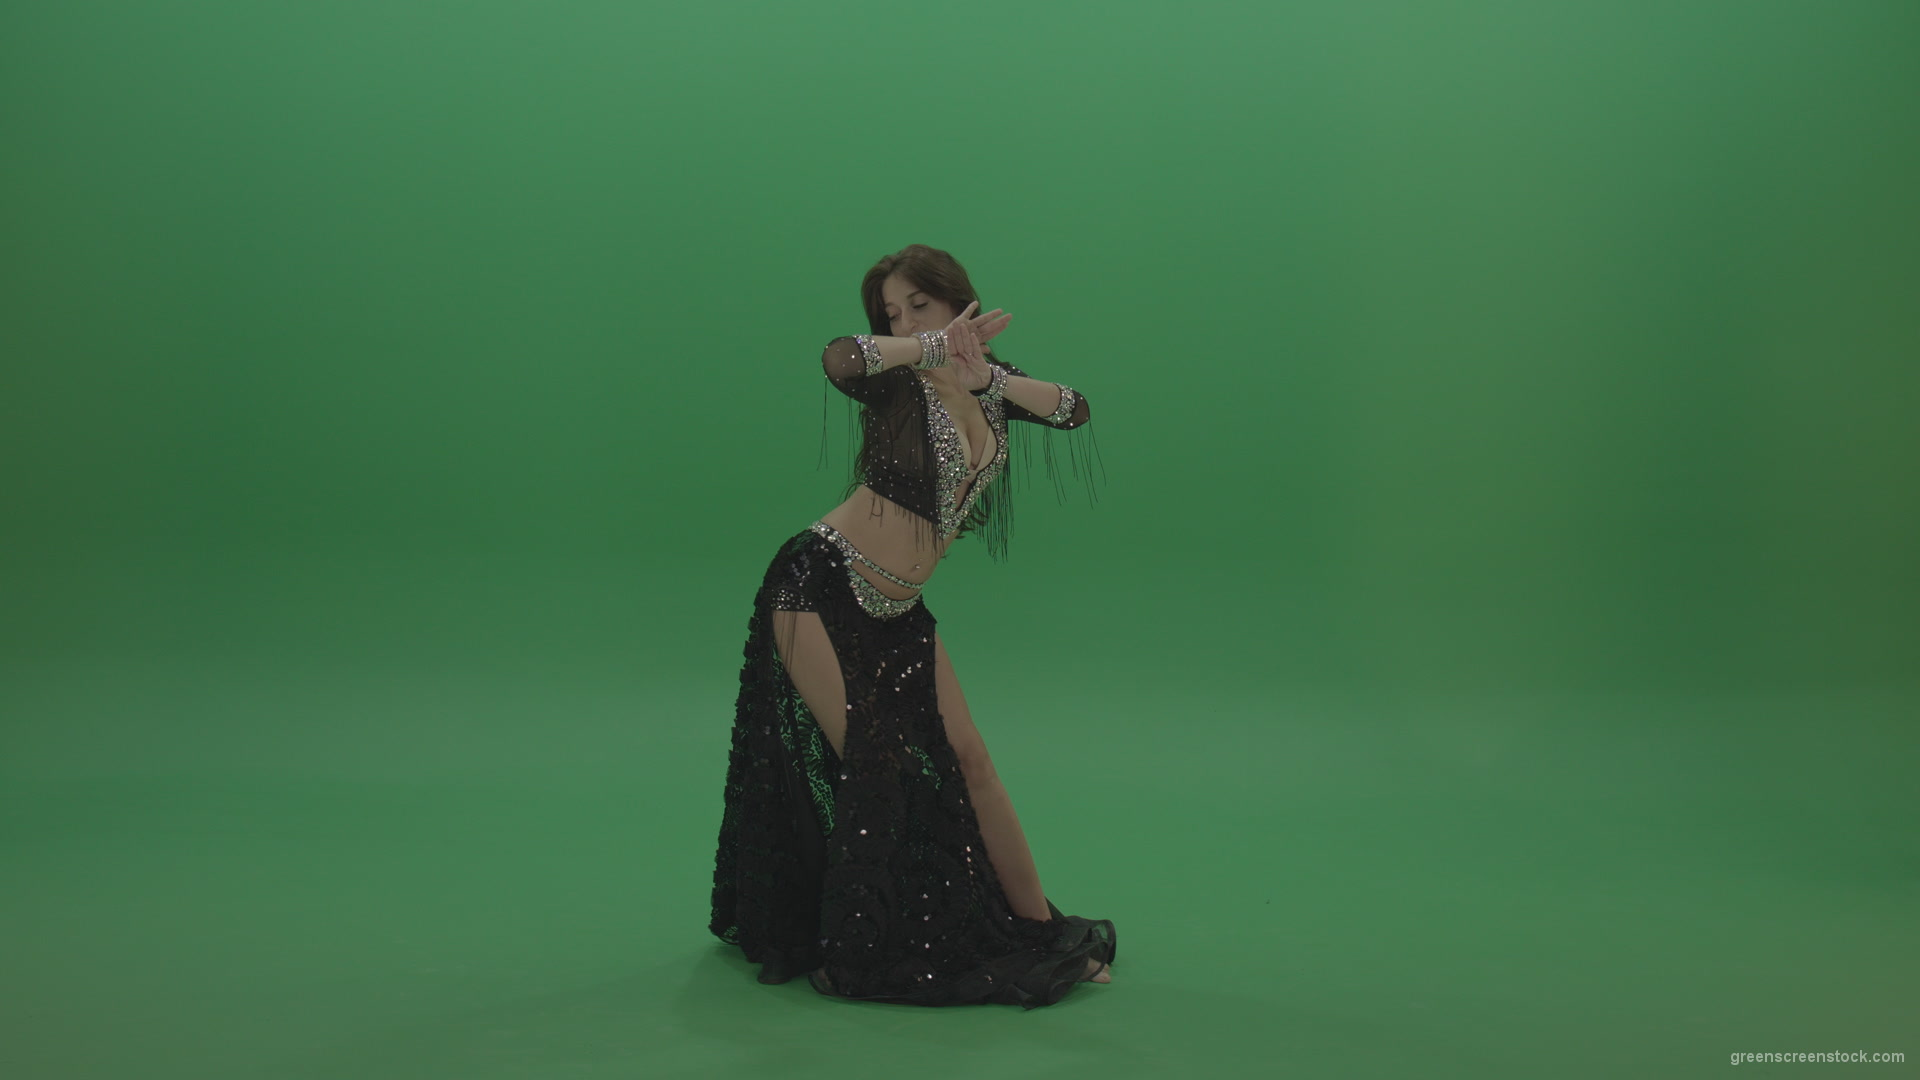 vj video background Admirable-belly-dancer-in-black-wear-display-amazing-dance-moves-over-chromakey-background_003